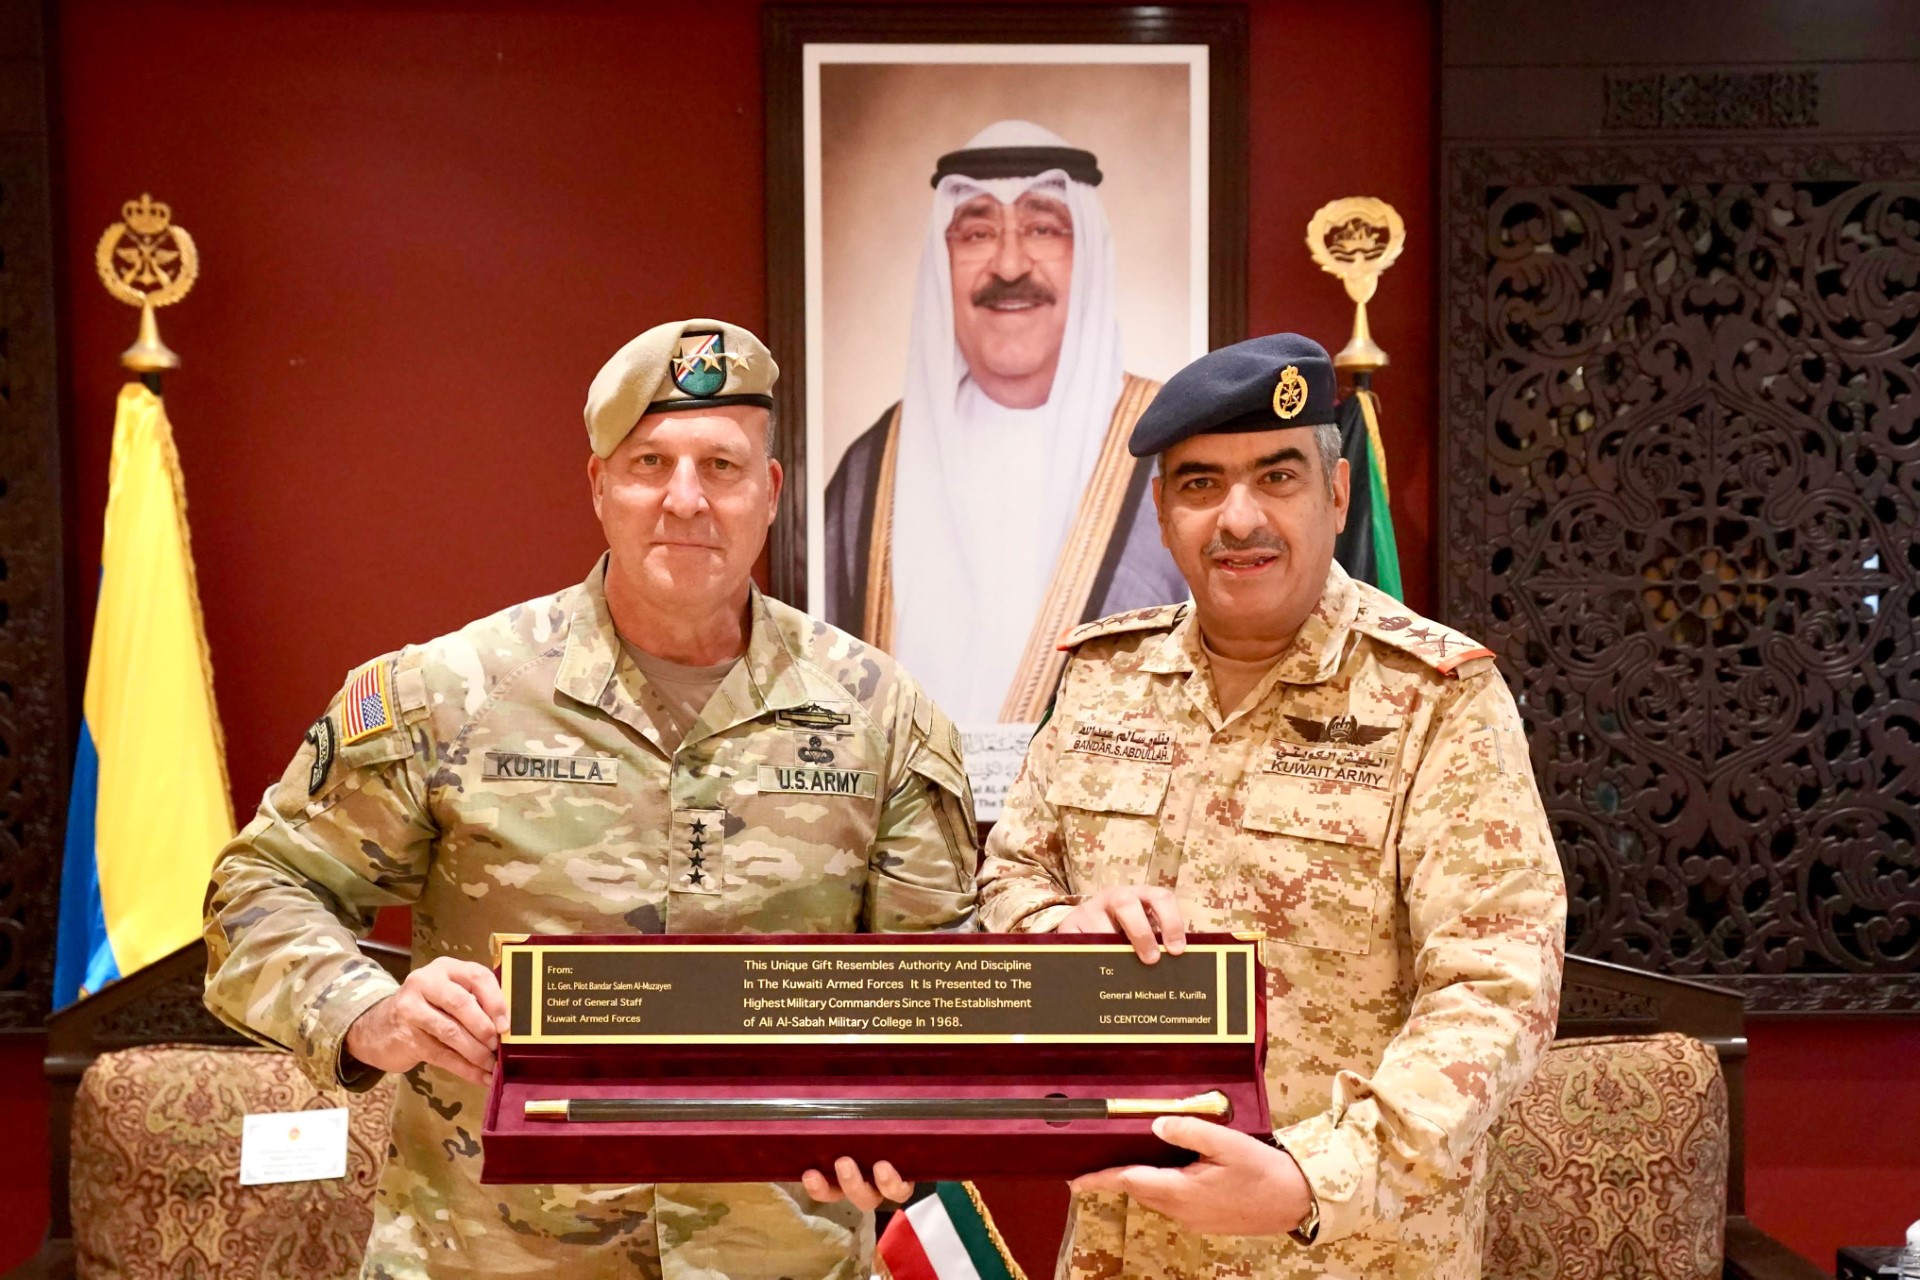 Kuwait Chief of Staff, CENTCOM commander discuss issues of common interest